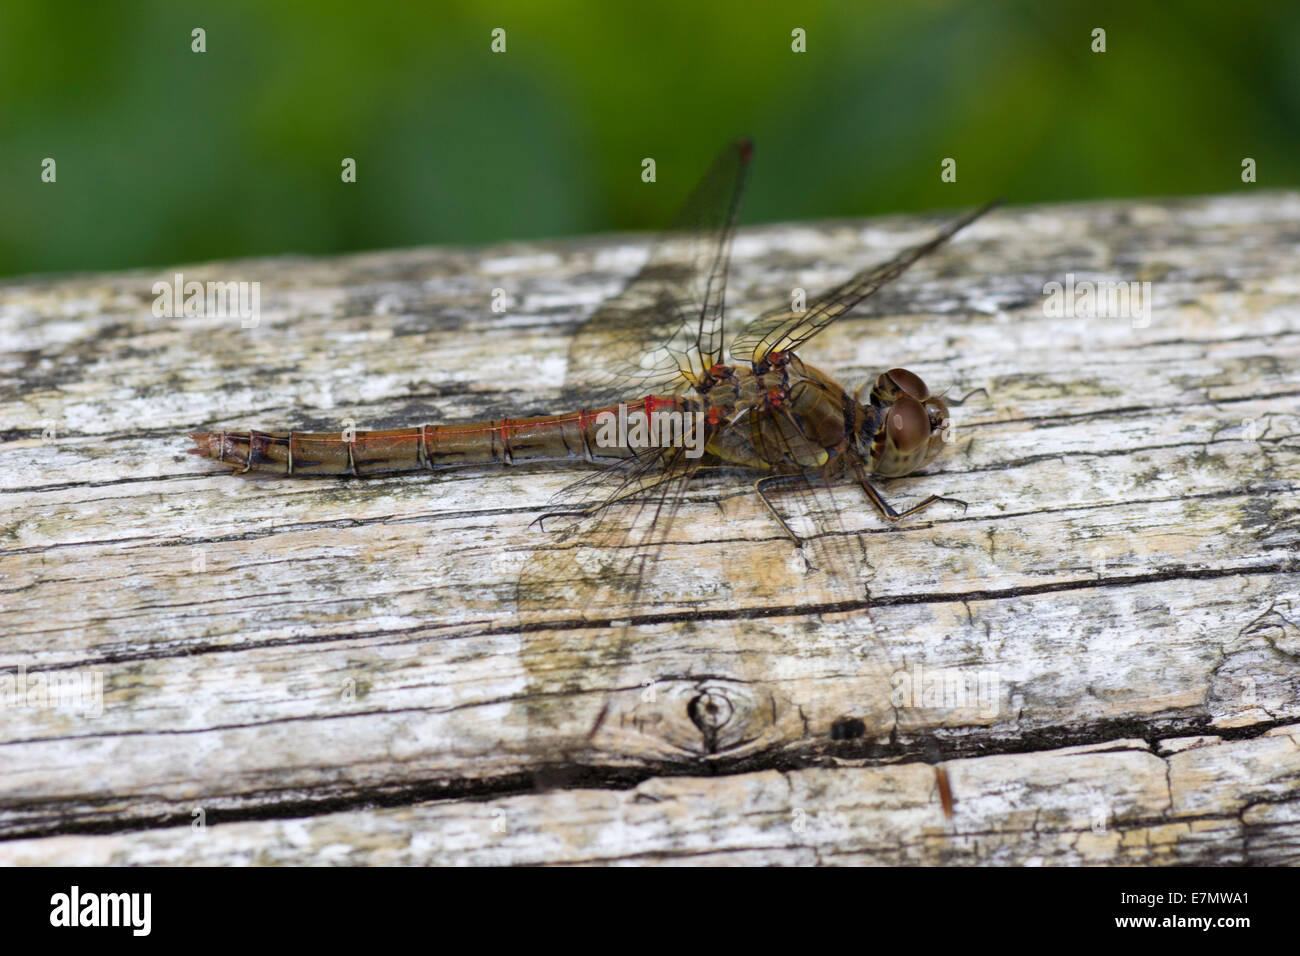 Female common darter dragonfly, Sympetrum striolatum, at rest on a weathered fence rail Stock Photo